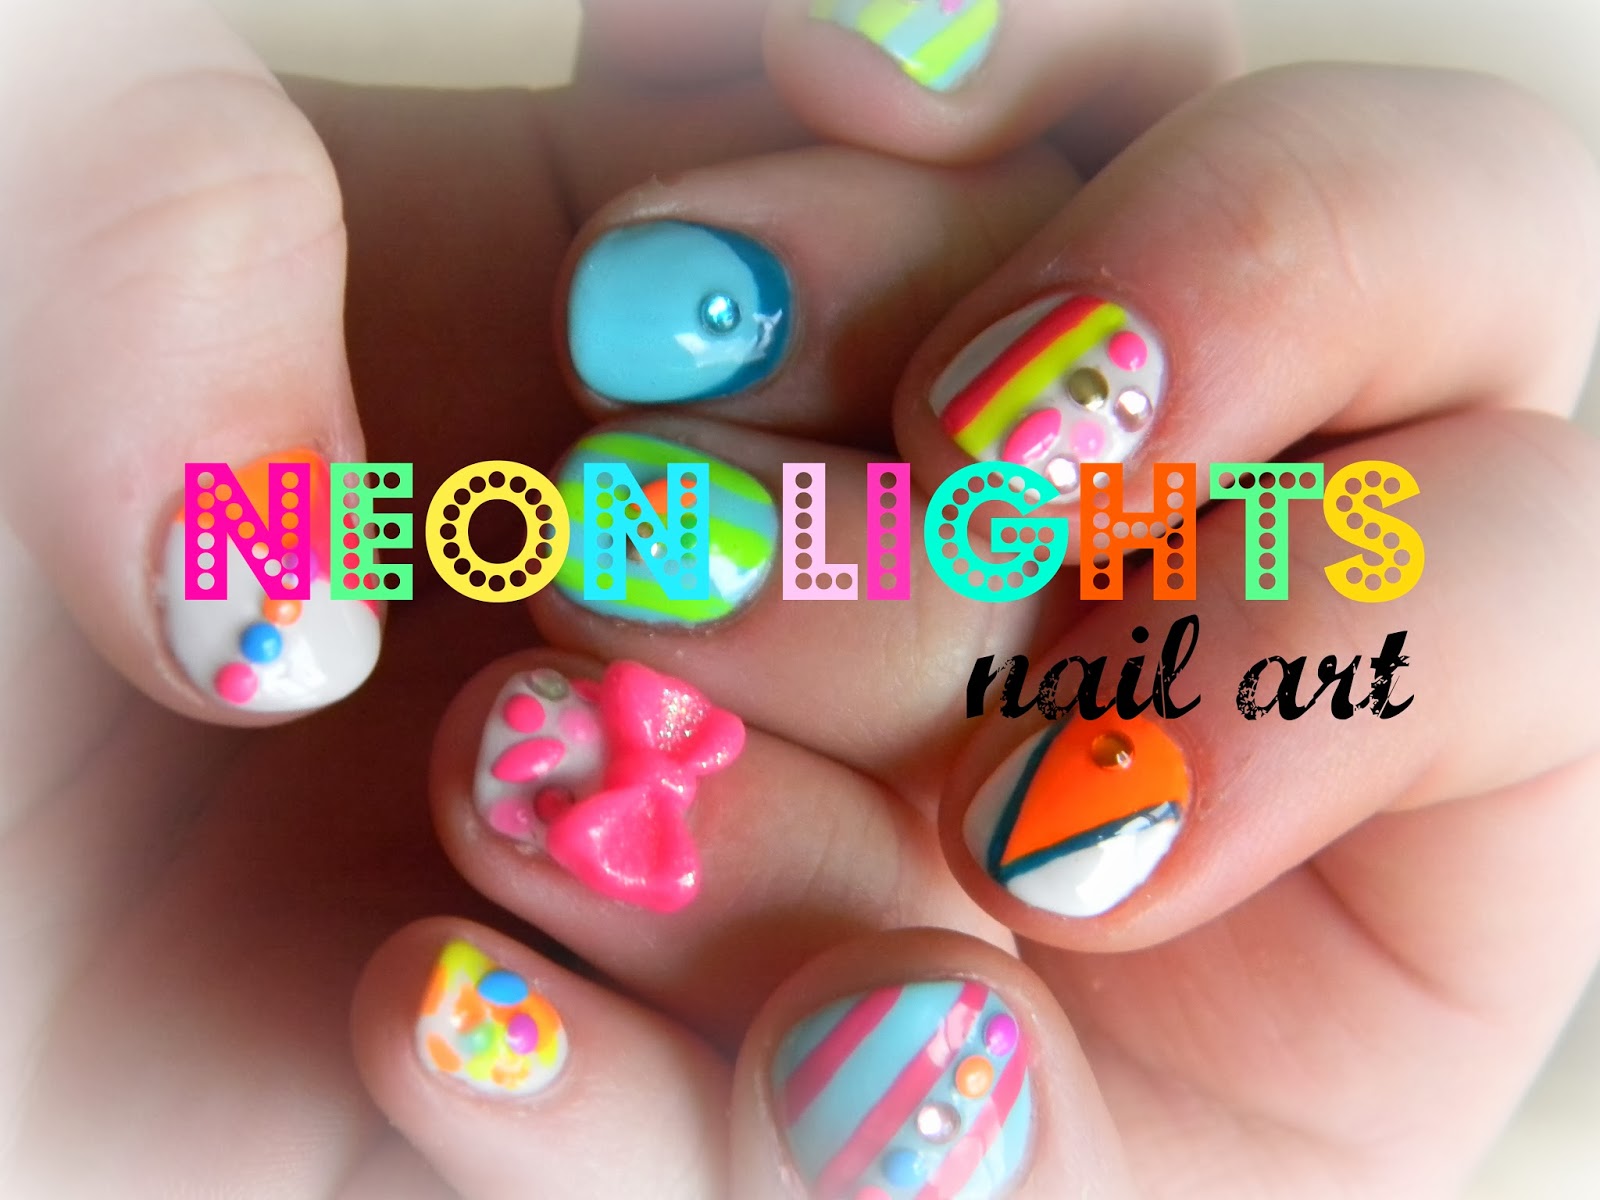 Neon Nail Art with Glitter Accents - wide 3